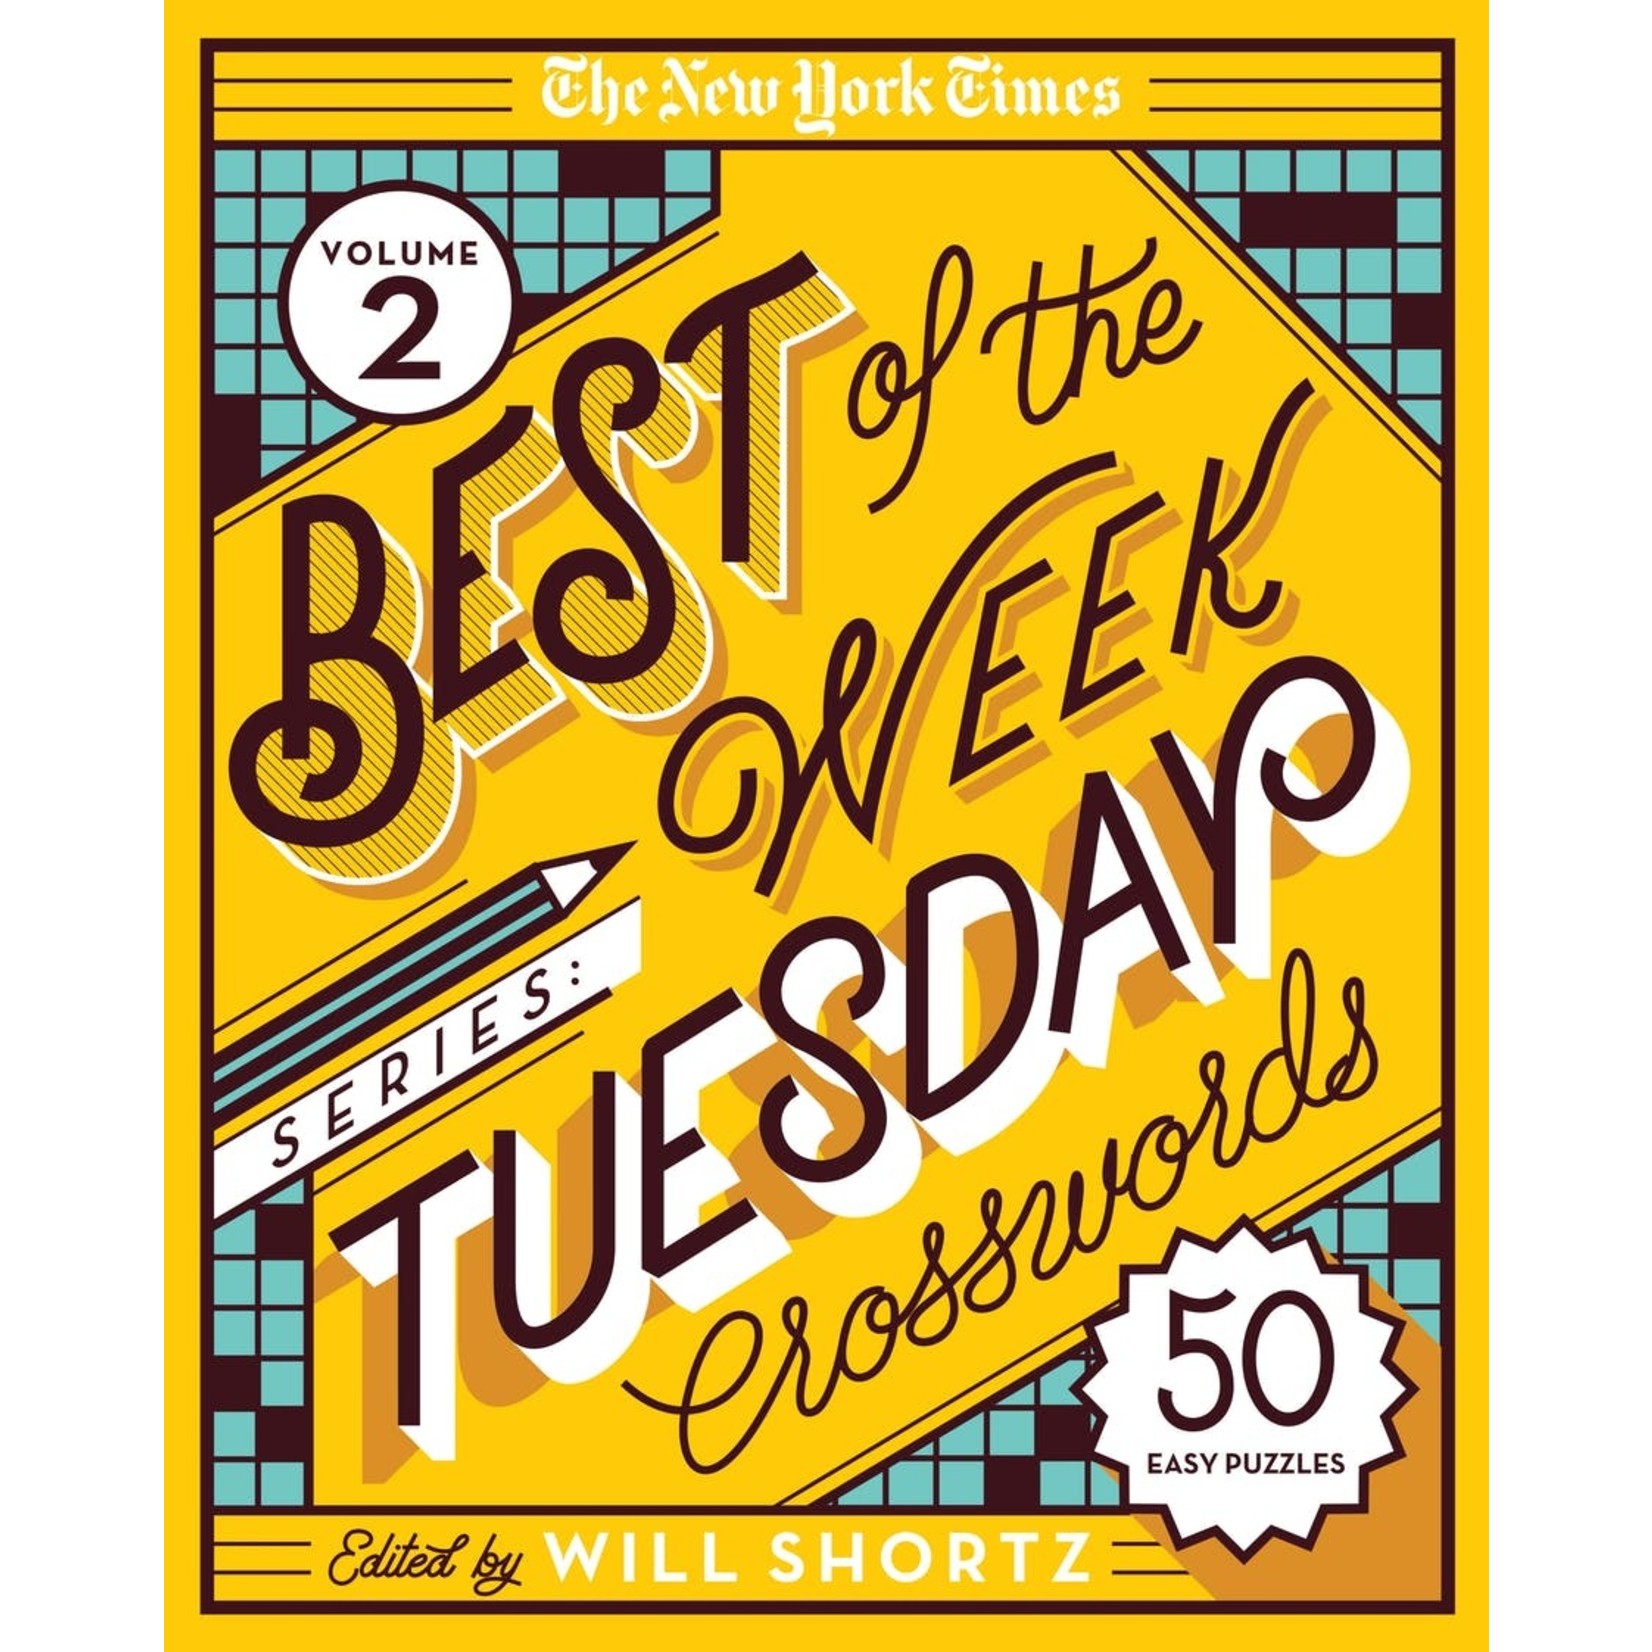 The New York Times The New York Times: Best of the Week, Series 2, Tuesday Crosswords